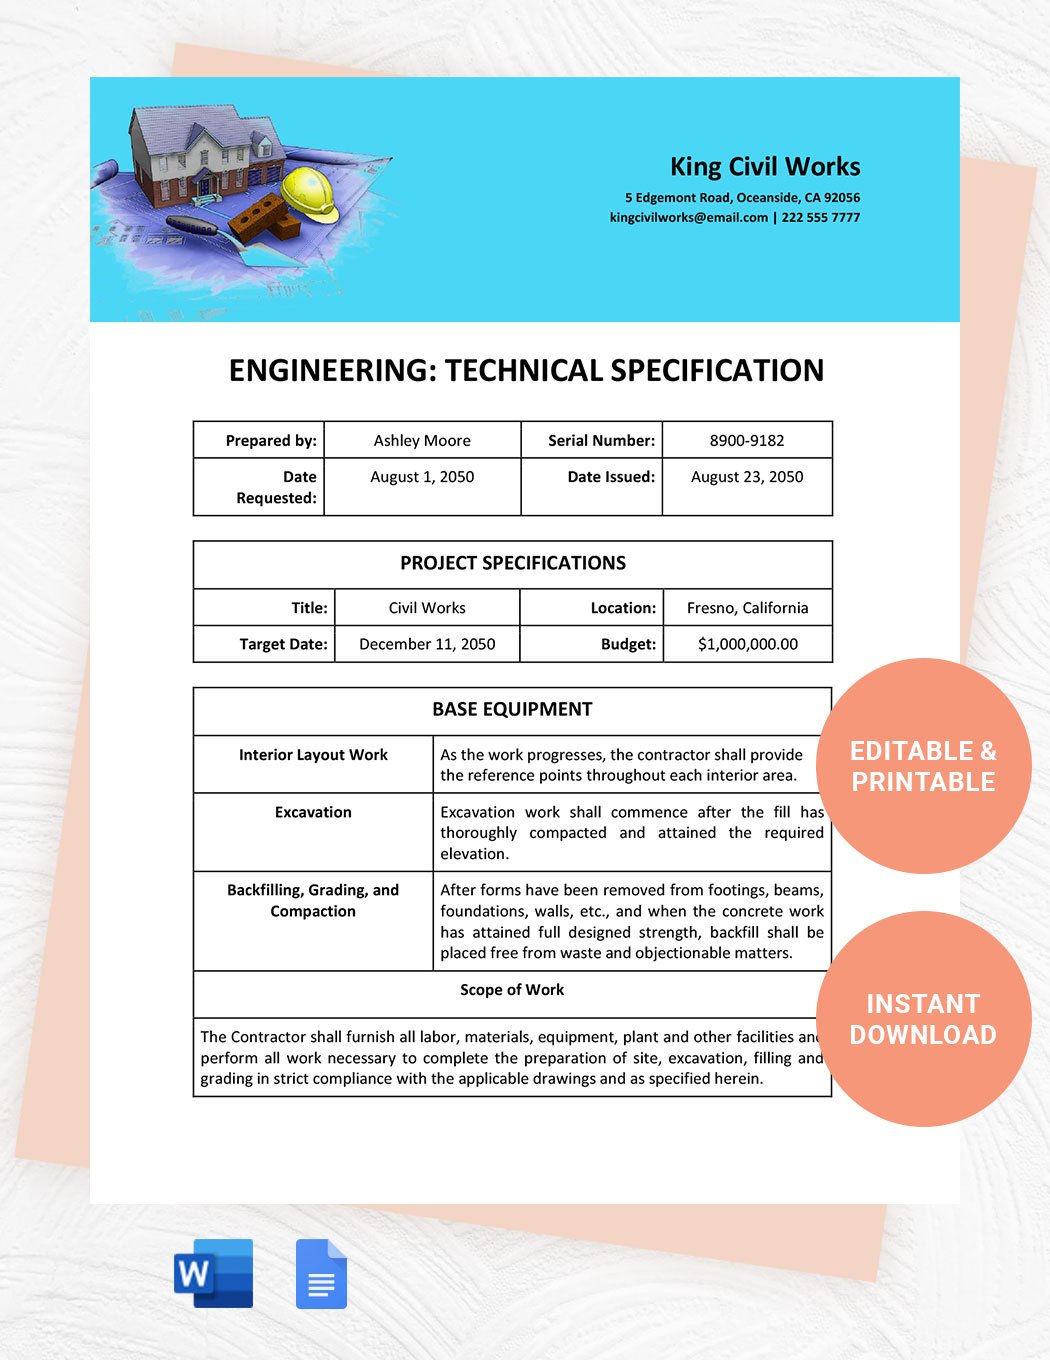 Engineering Technical Specification Template